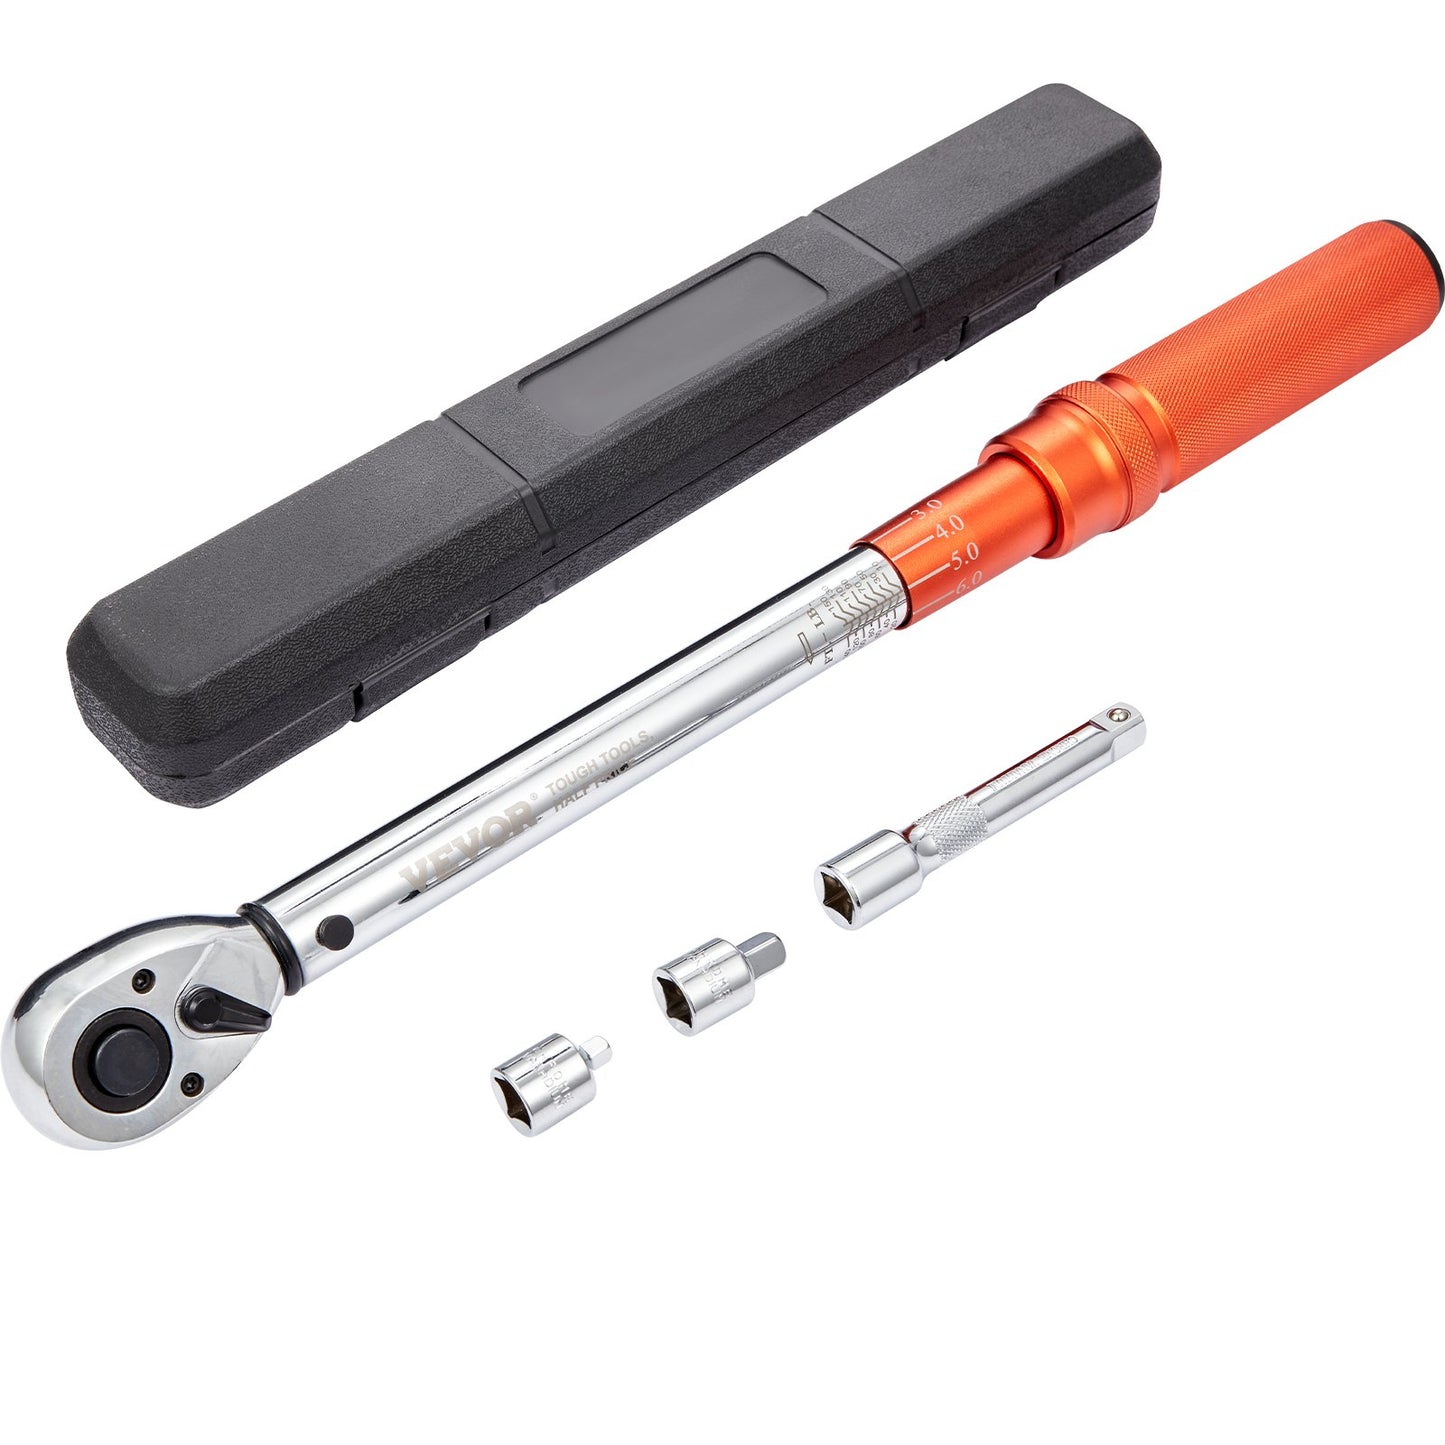 Torque Wrench, 1/2-inch Drive Click Torque Wrench 10-150ft.lb/14-204n.m, Dual-Direction Adjustable Torque Wrench Set, Mechanical Dual Range Scales Torque Wrench Kit with Adapters Extension Rod